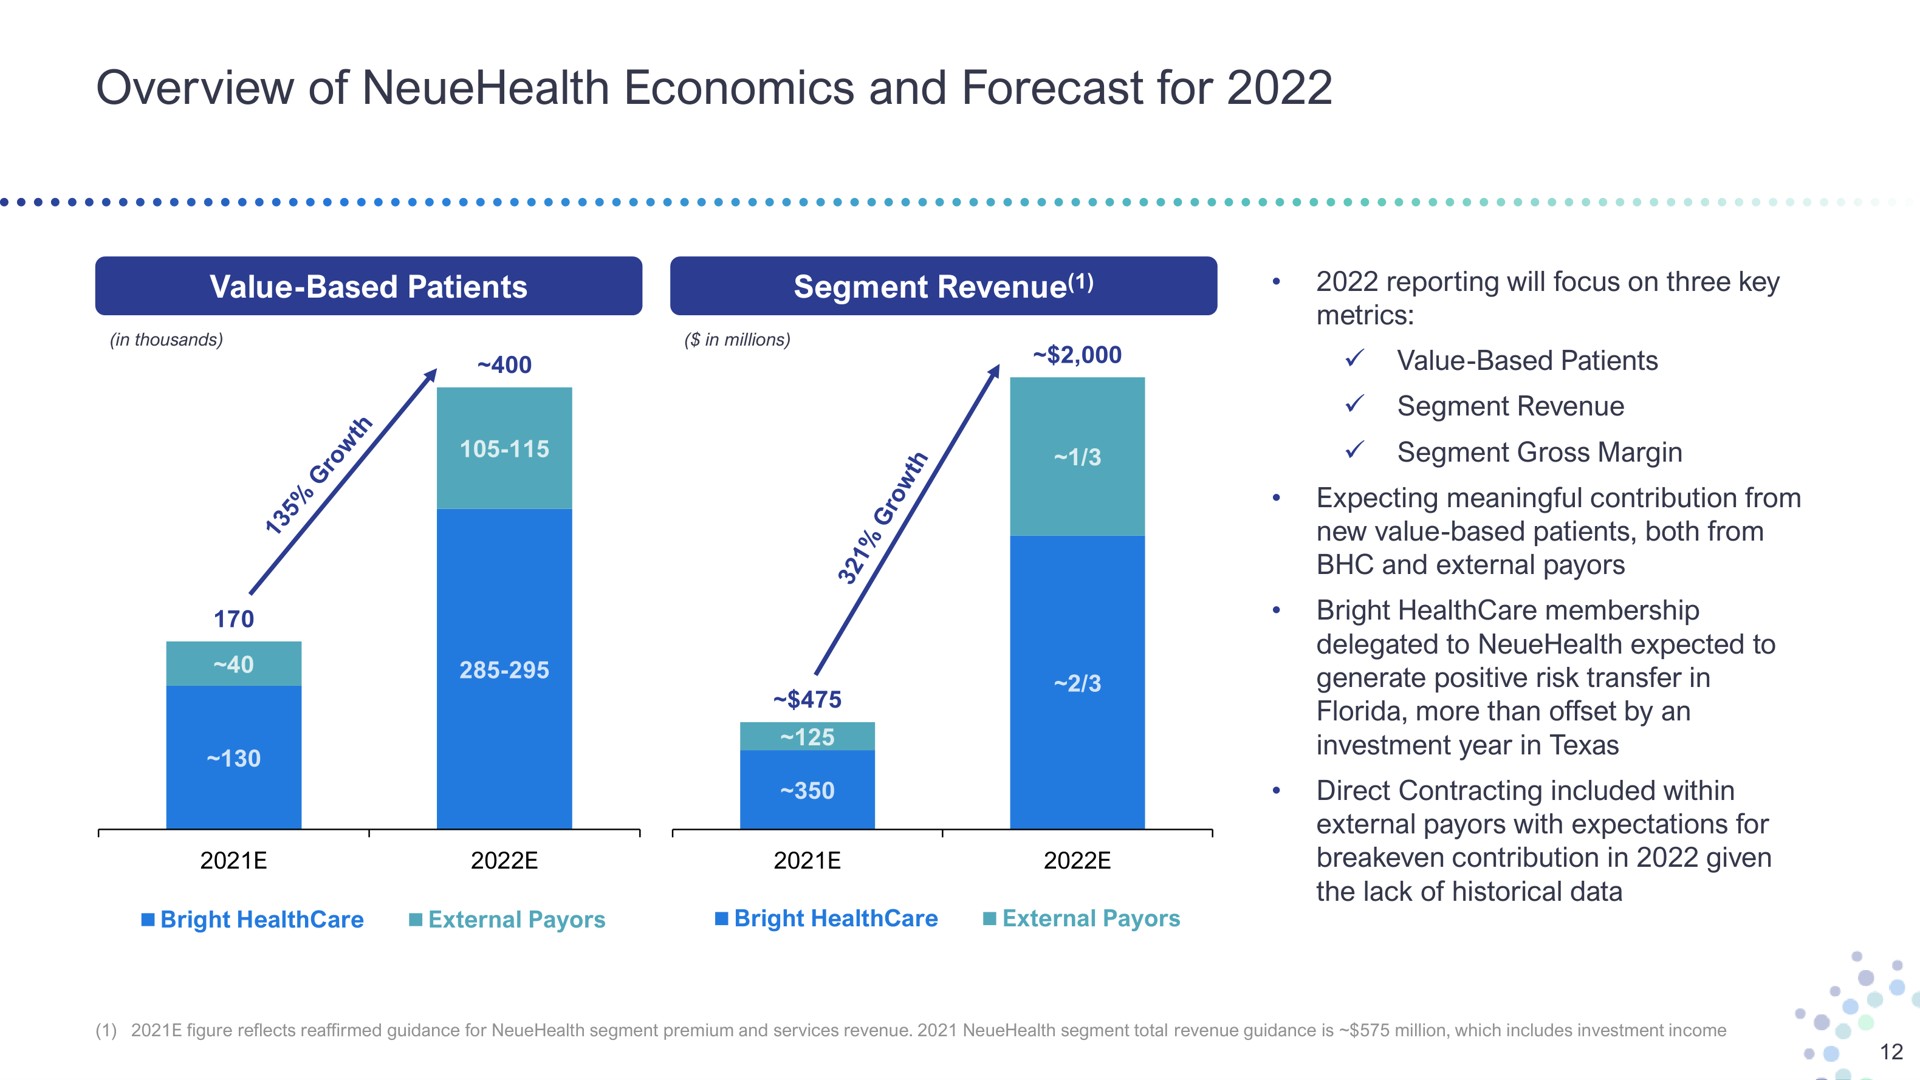 overview of economics and forecast for value based patients lin tri mace reporting will focus on three key metrics value based patients segment revenue segment gross margin expecting meaningful contribution from new value based patients both from external bright membership delegated to expected to generate positive risk transfer in more than offset by an investment year in direct contracting included within external with expectations contribution in given the lack historical data | Bright Health Group